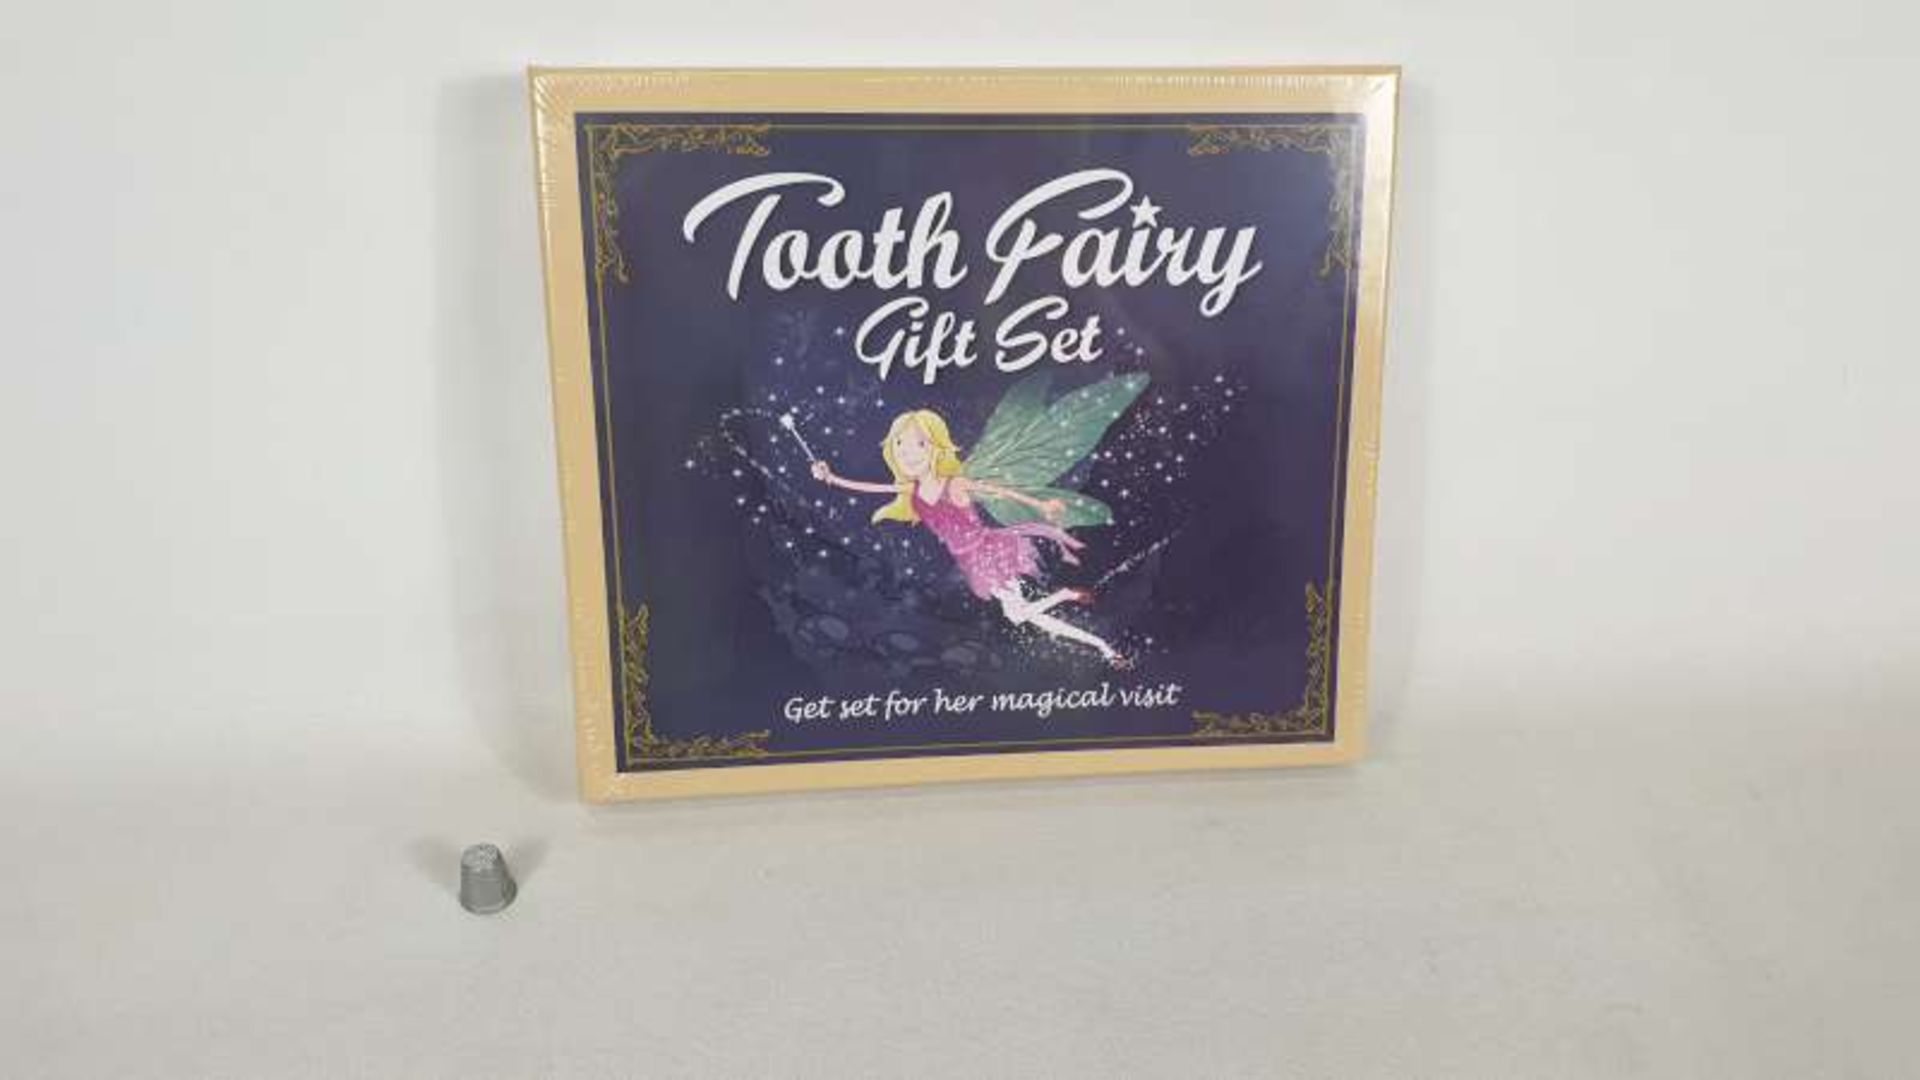 36 X TOOTH FAIRY GIFT SETS IN 3 BOXES